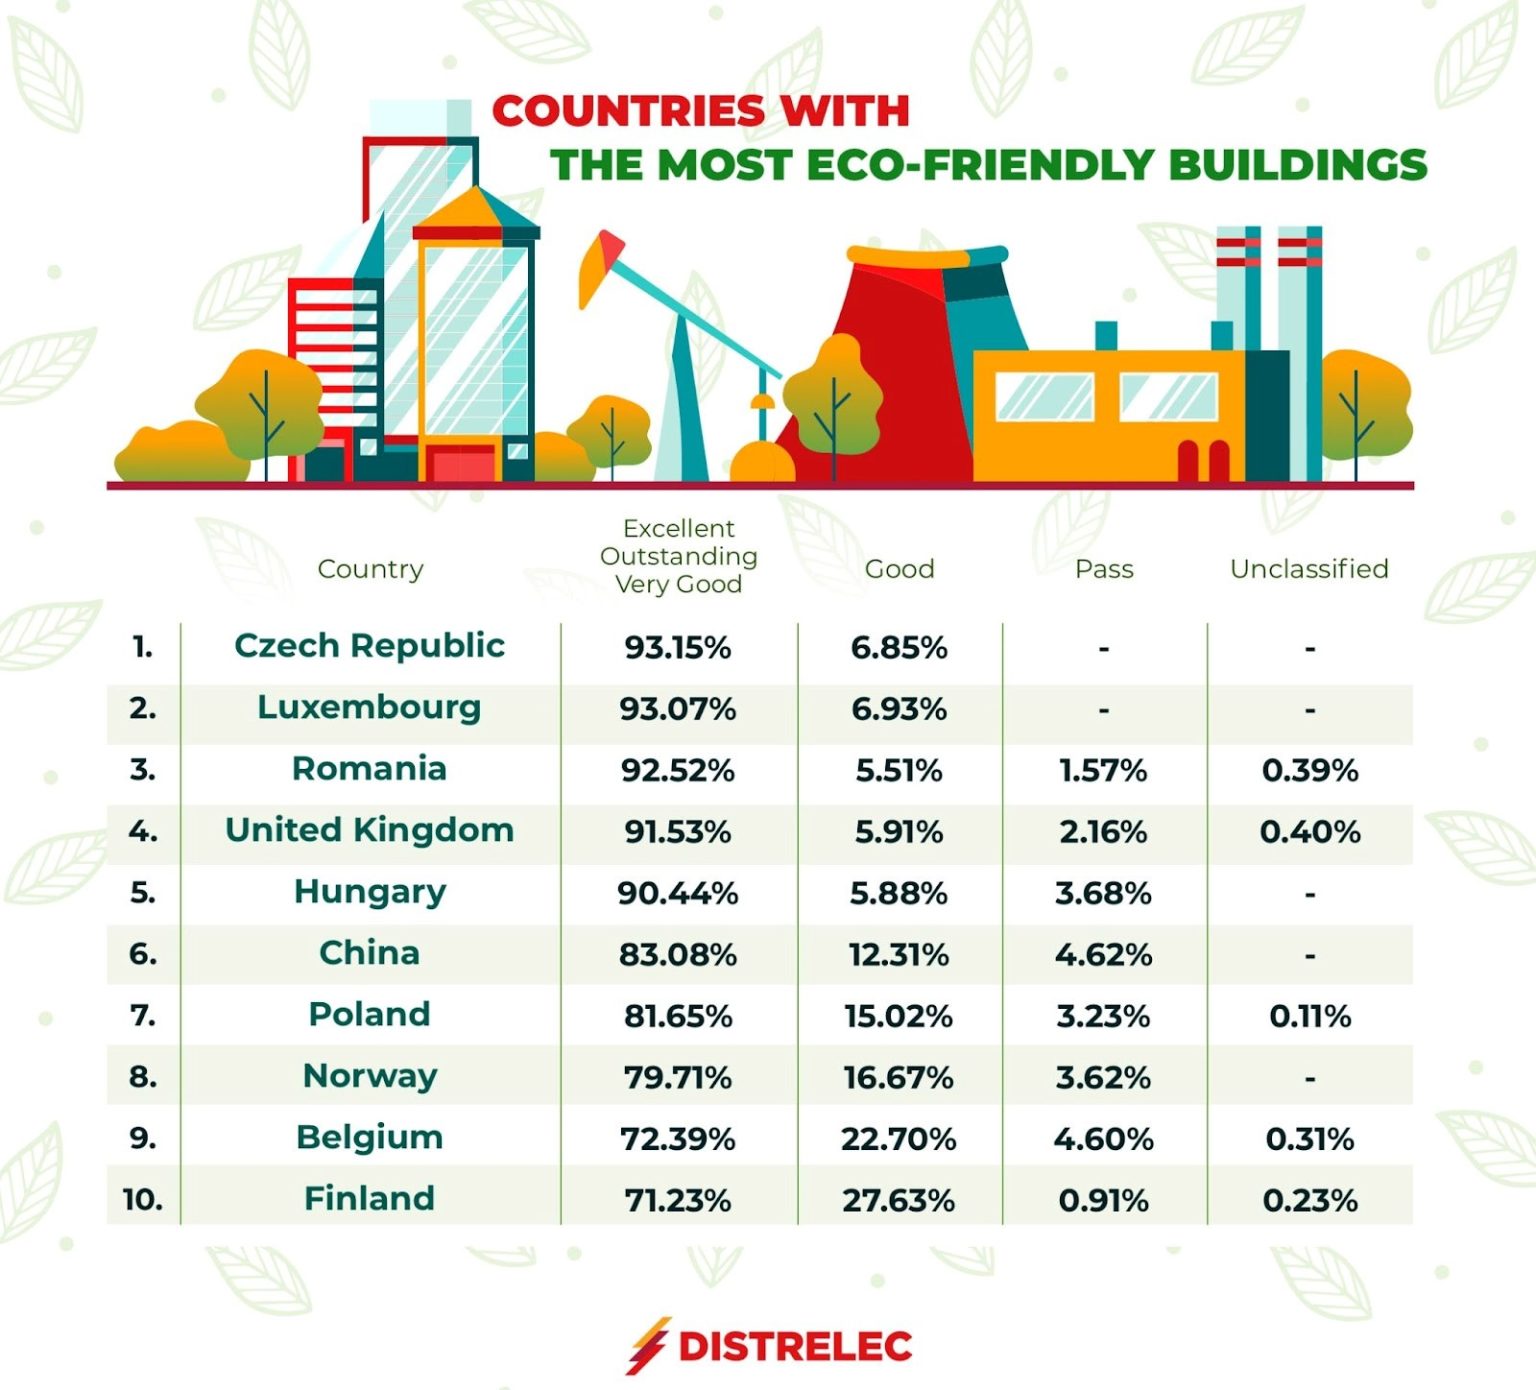 New Data Reveals Countries with the Most Eco-Friendly Buildings in the World